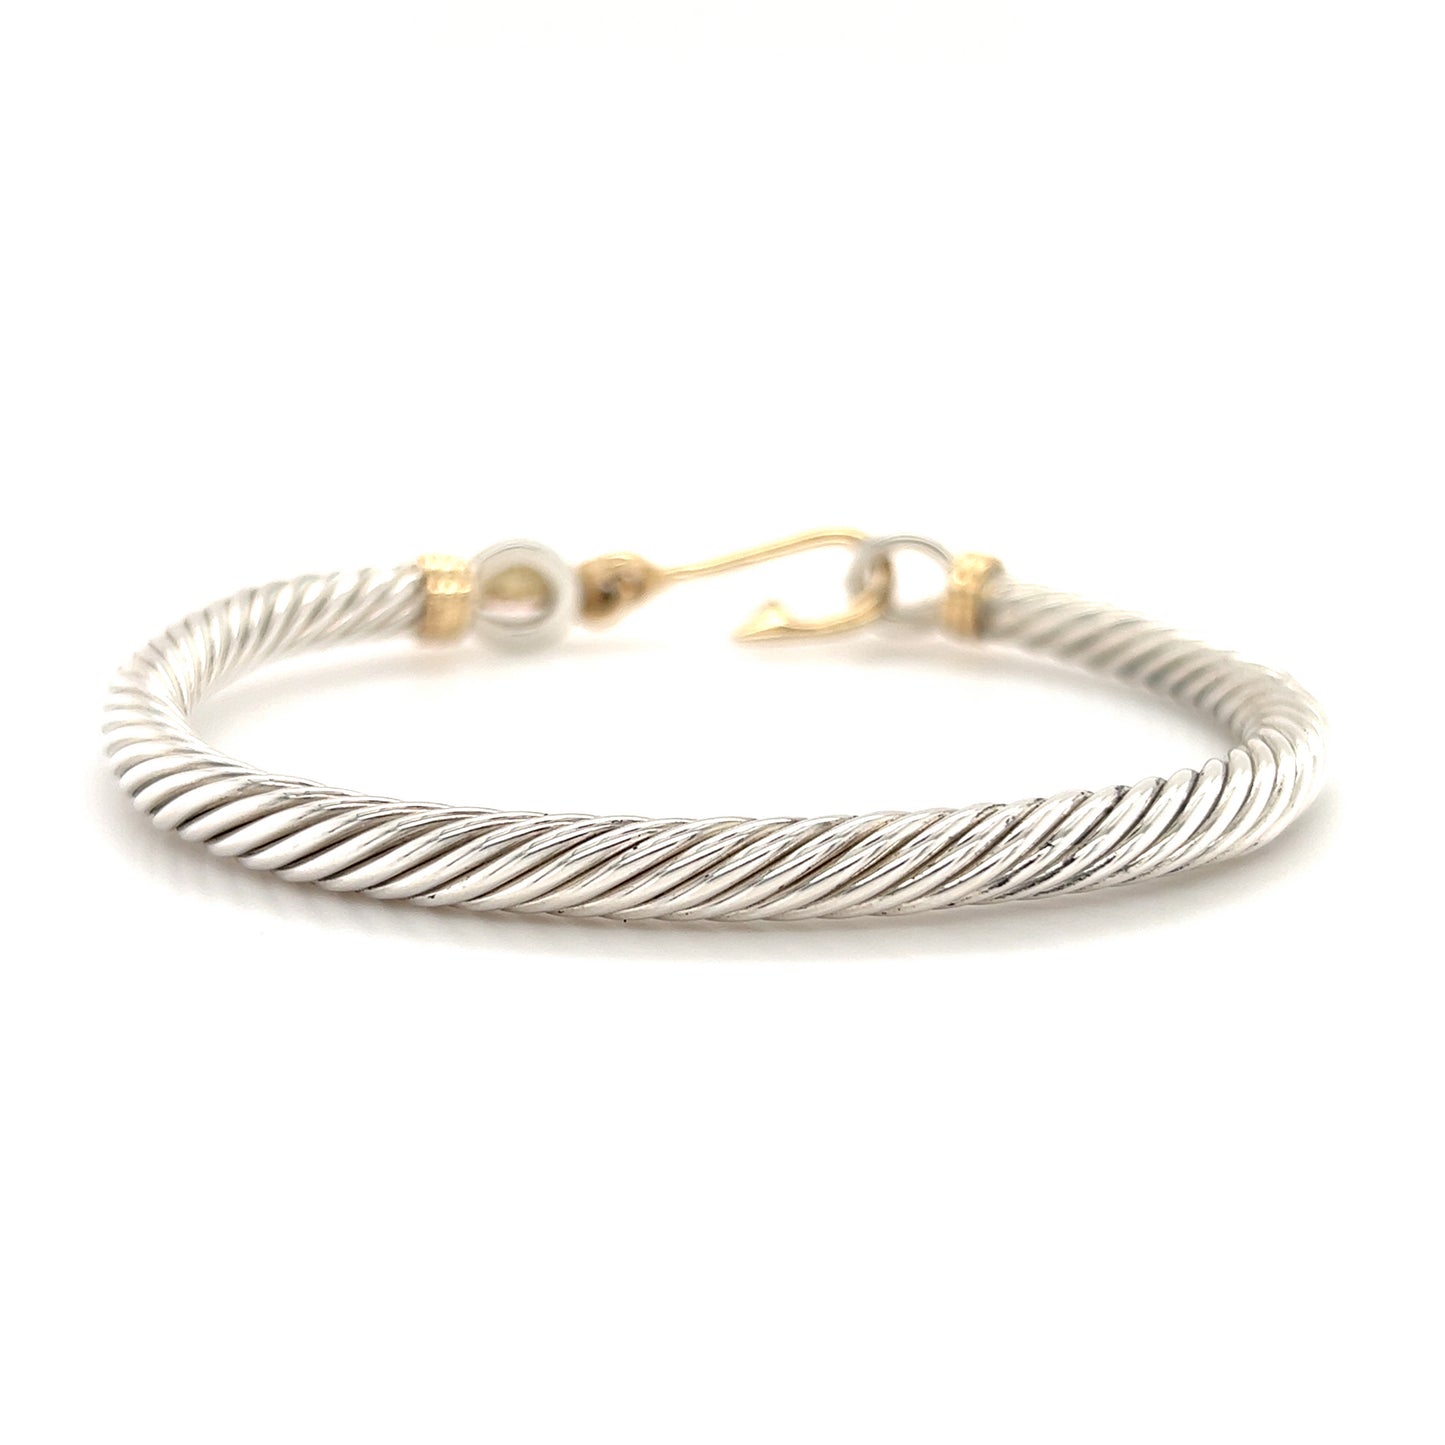 Fish Hook Cable Bangle Bracelet with 14K Wraps and Clasp in Sterling Silver Flat Back View